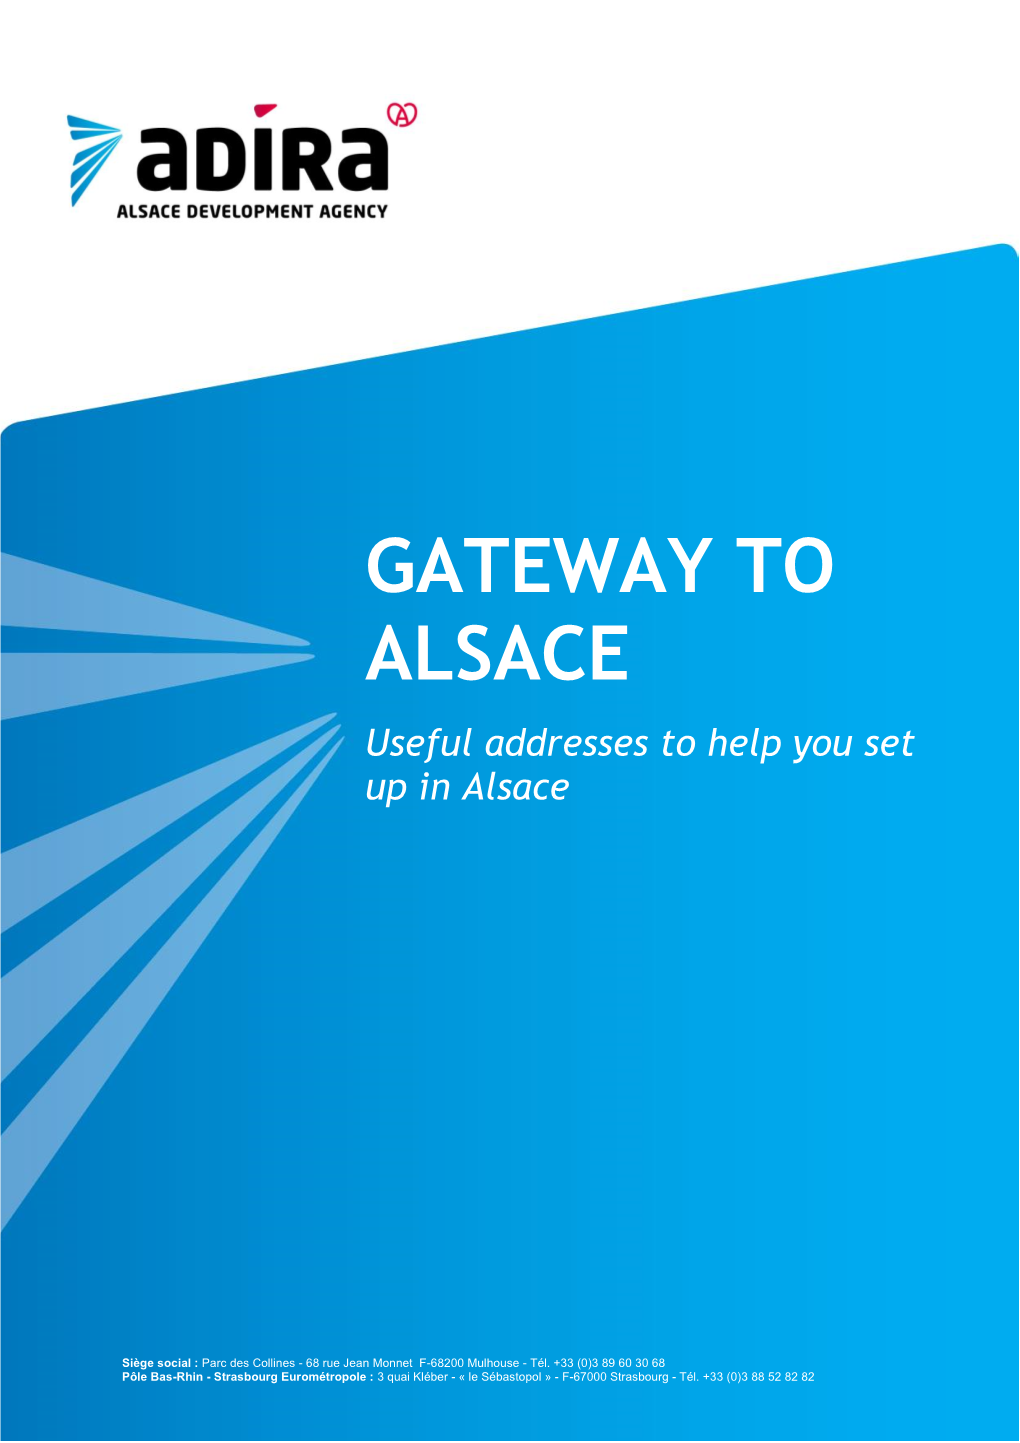 GATEWAY to ALSACE Useful Addresses to Help You Set up in Alsace